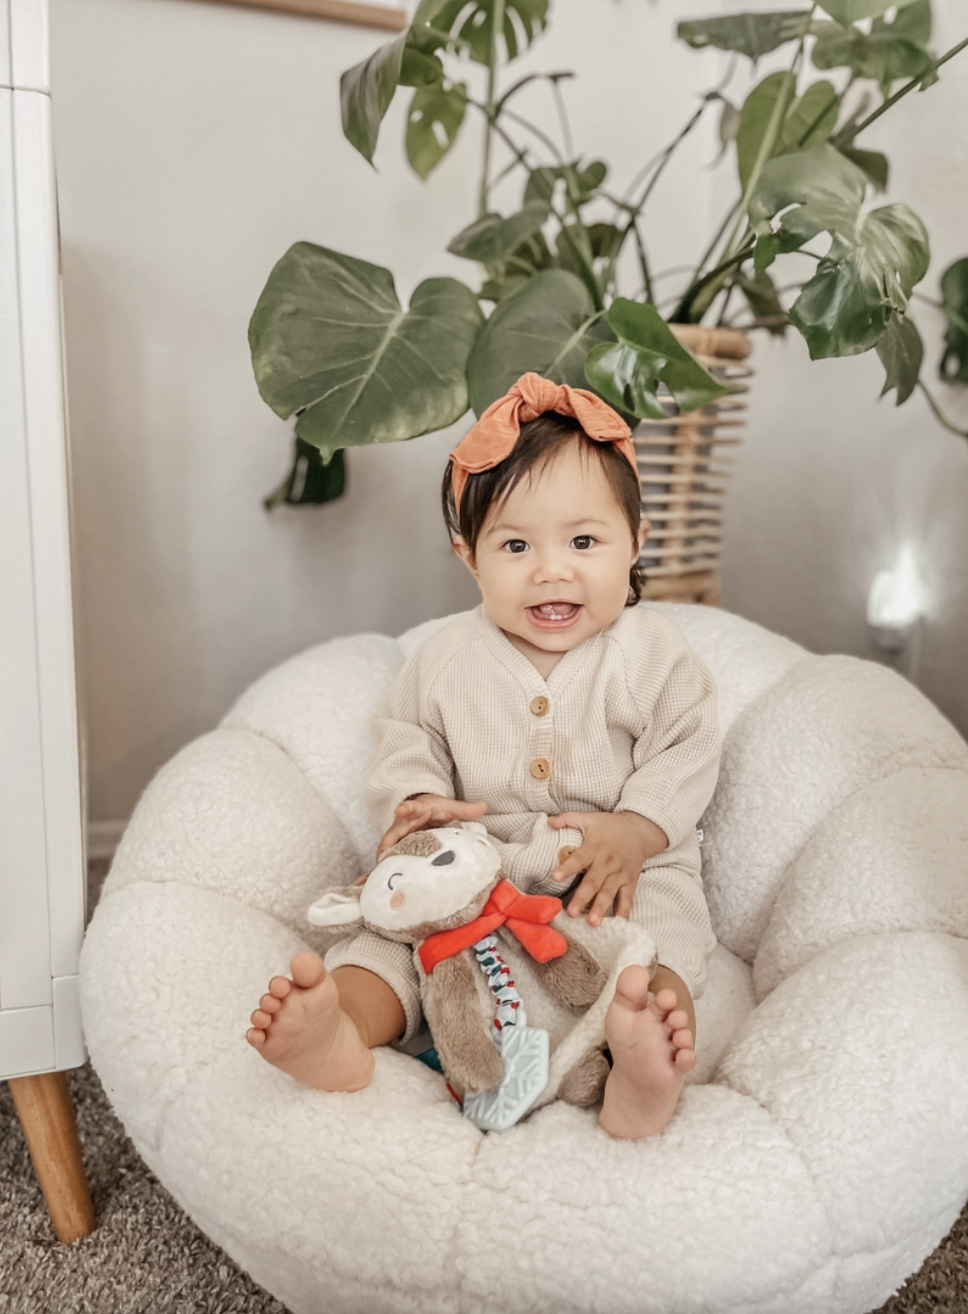 Cuddle &amp; Bond! Our snuggly Itzy Lovey™ features soft sherpa fabric and textured ribbons that baby will love to explore! A textured silicone teether helps massage